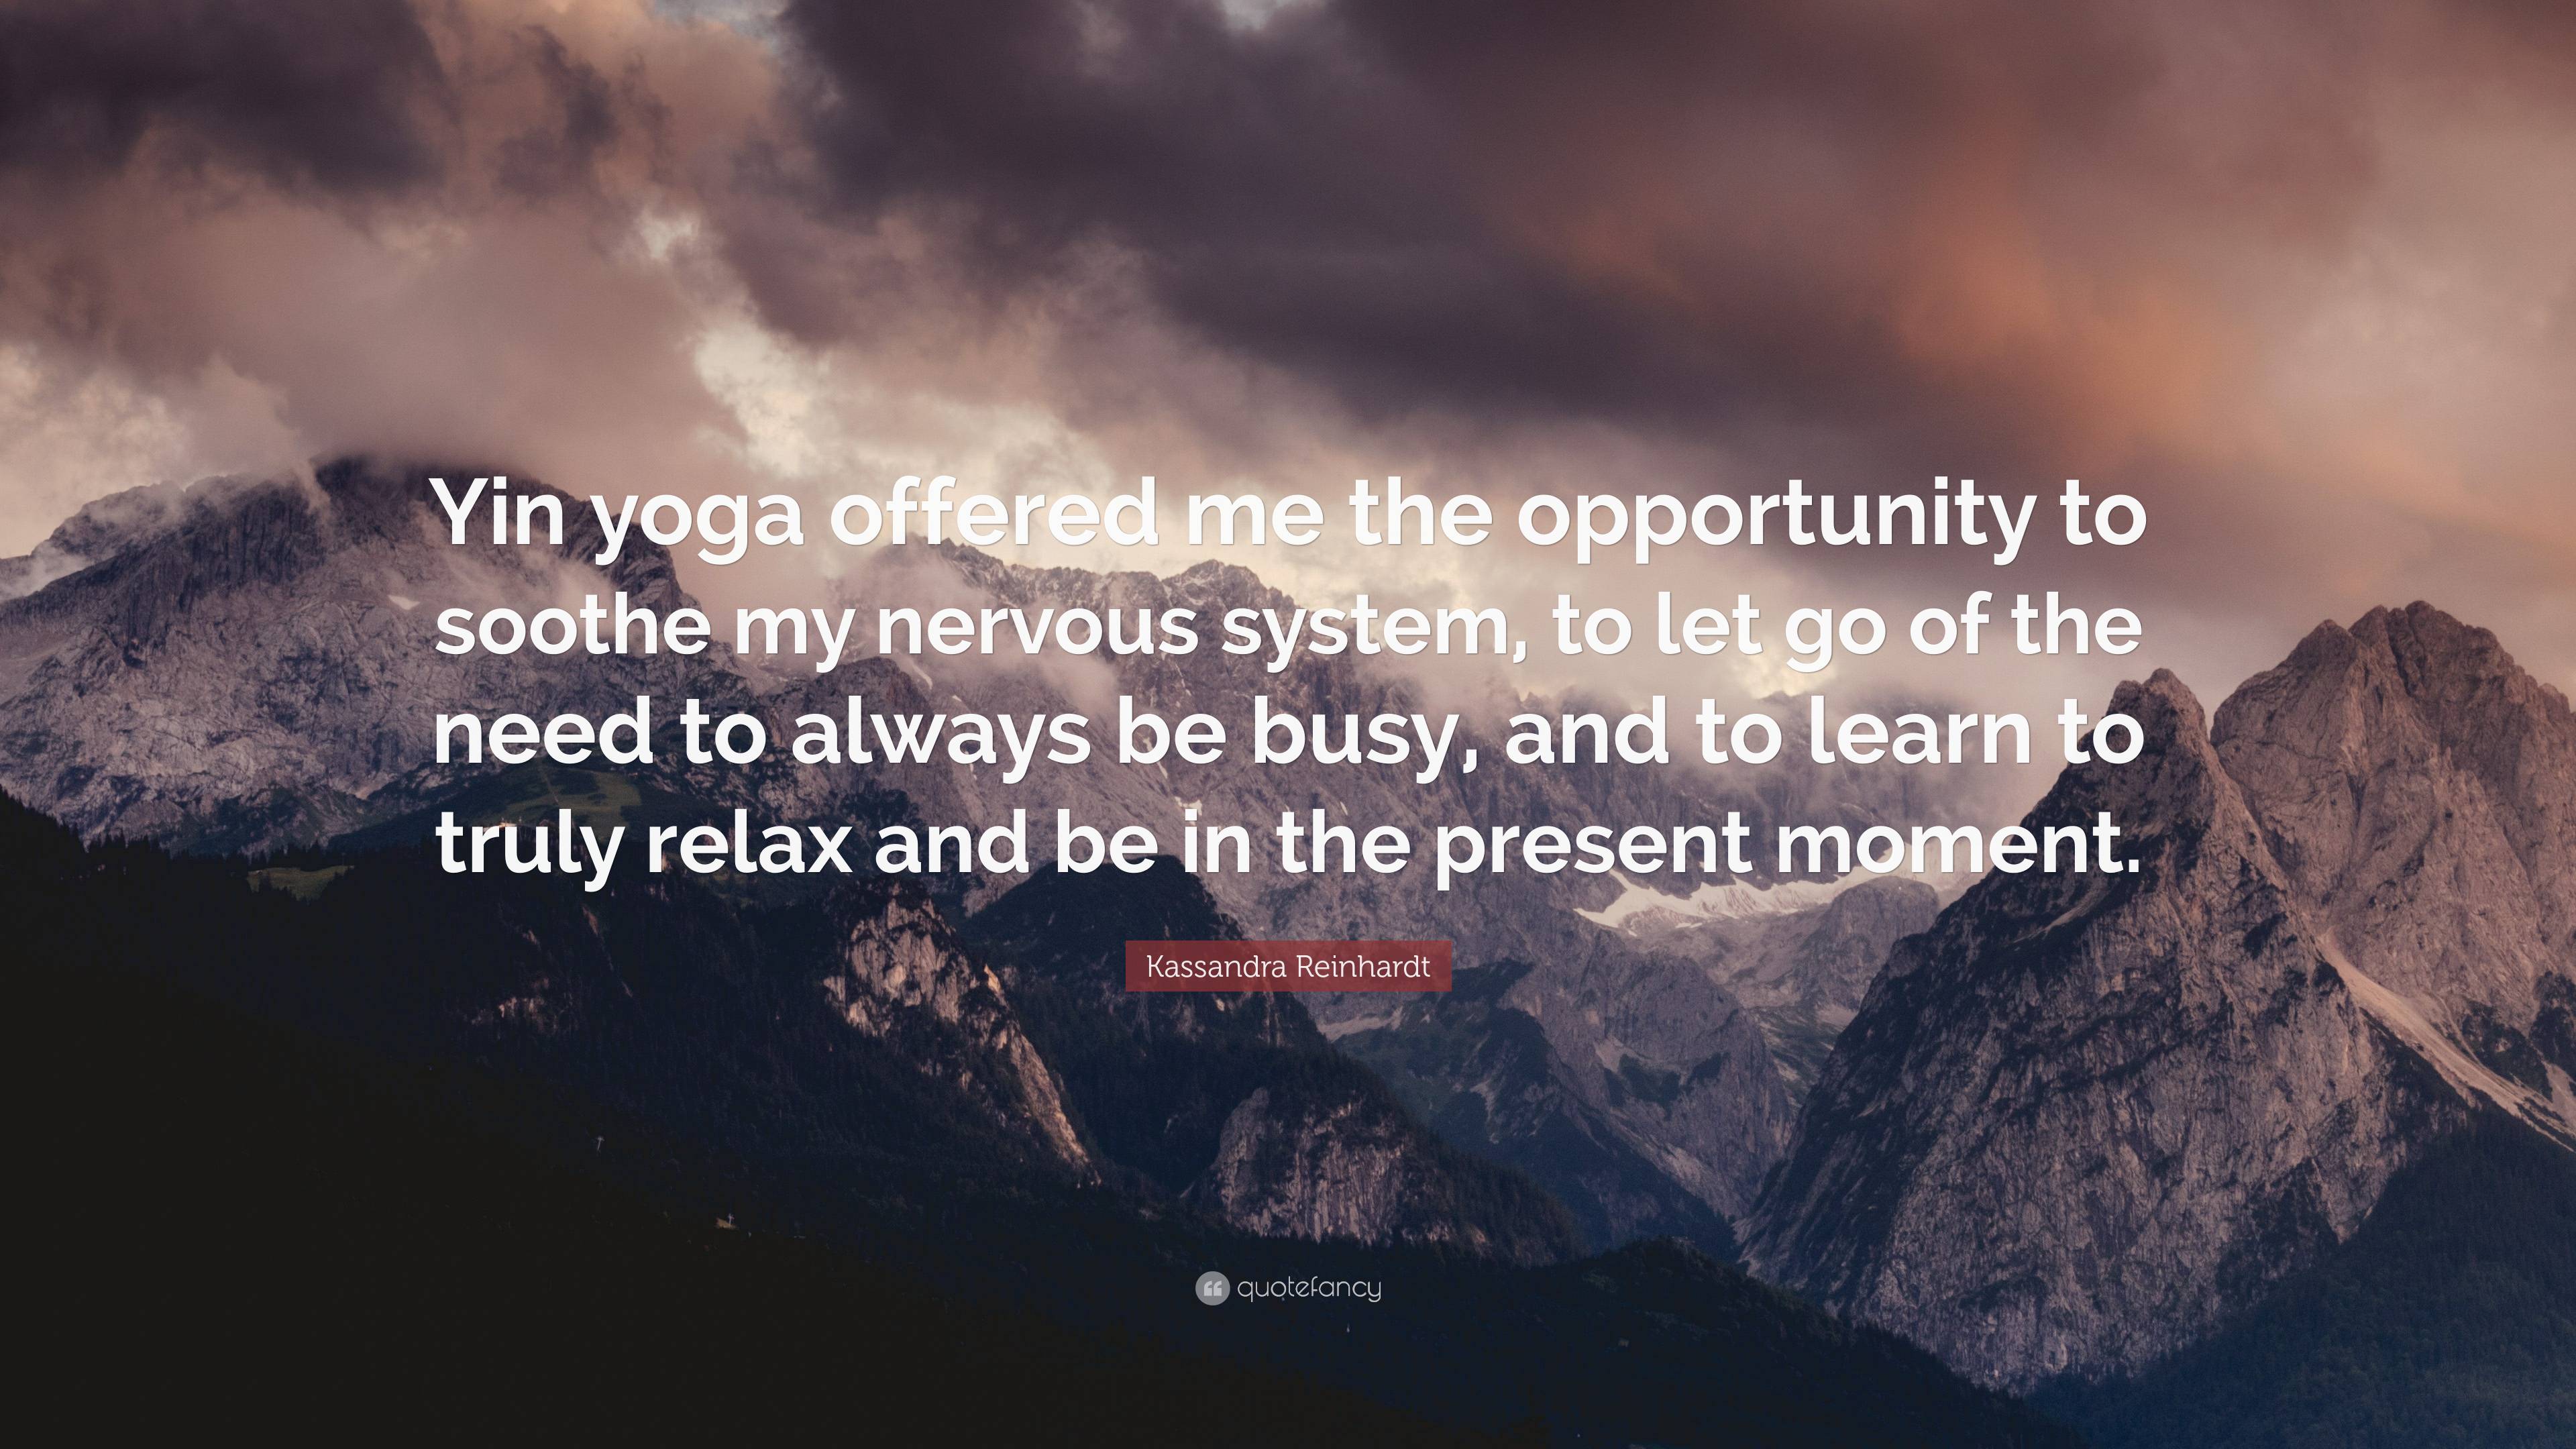 Kassandra Reinhardt Quote: “Yin yoga offered me the opportunity to soothe  my nervous system, to let go of the need to always be busy, and to learn  t”